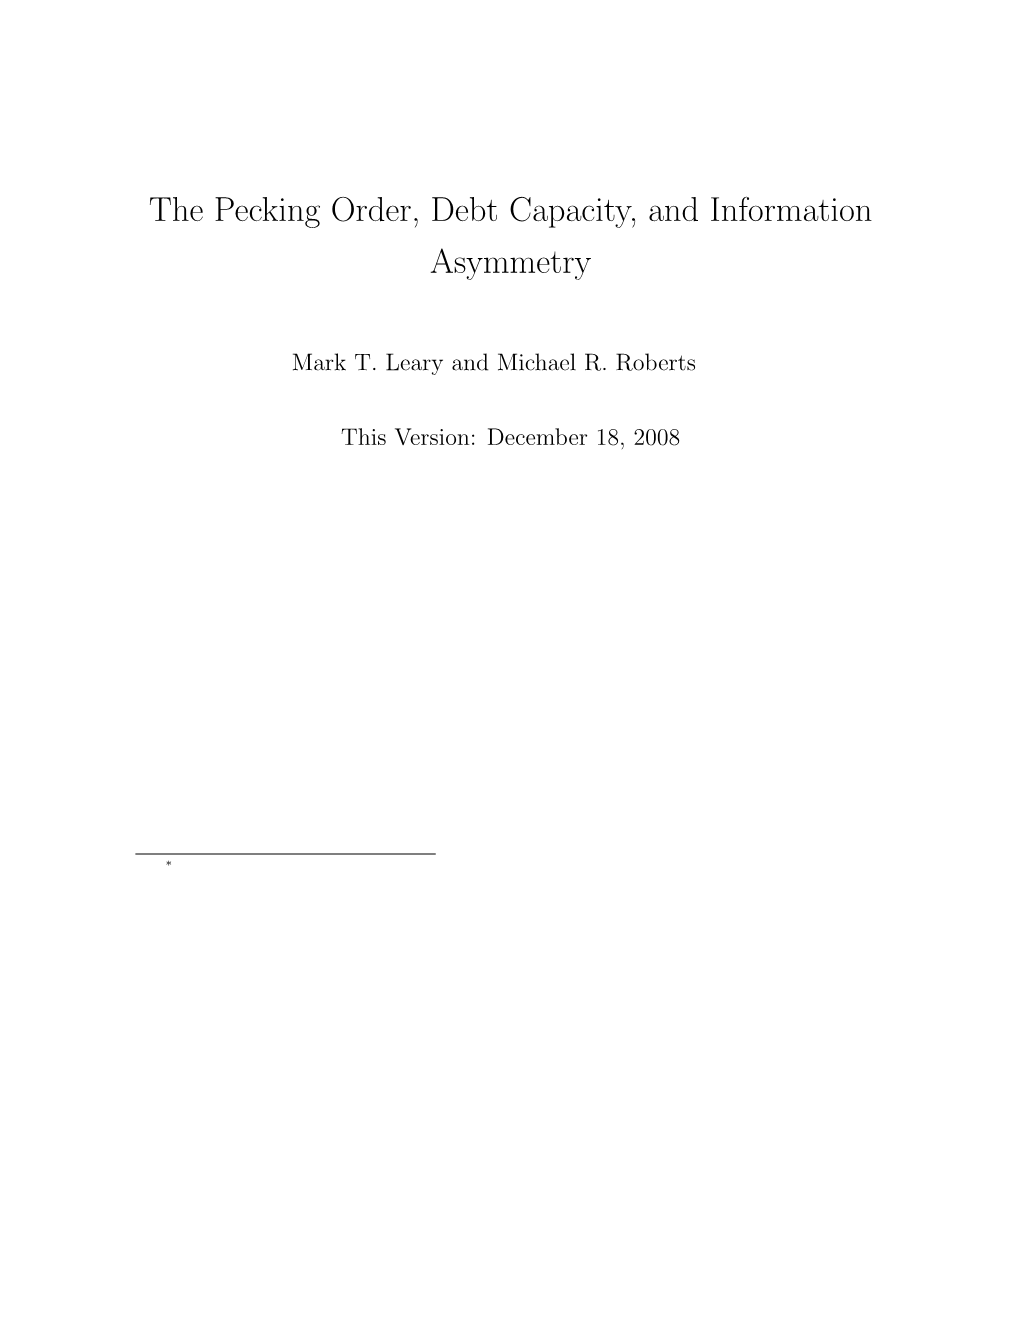 The Pecking Order, Debt Capacity, and Information Asymmetry